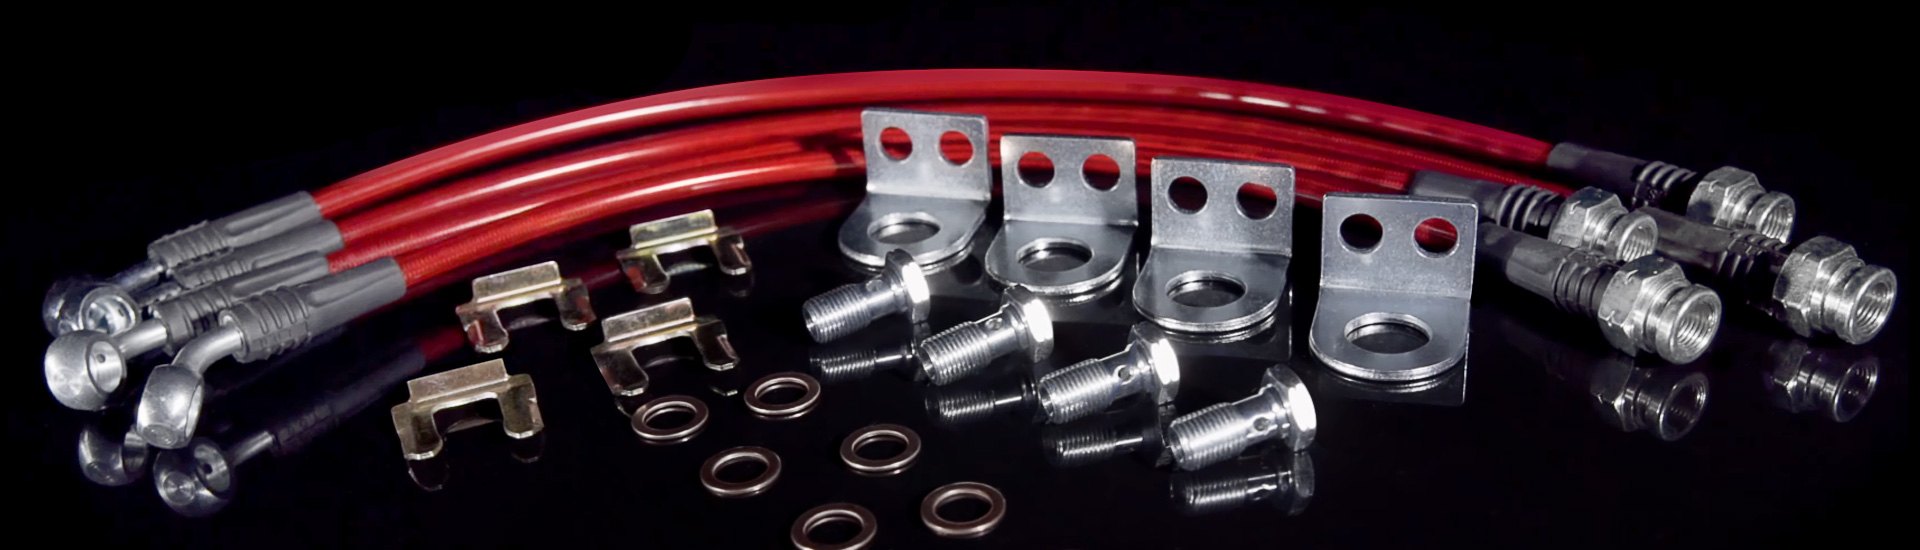 Maintain Consistent Brake Pressure With Power Stop SS Braided Hose Kit